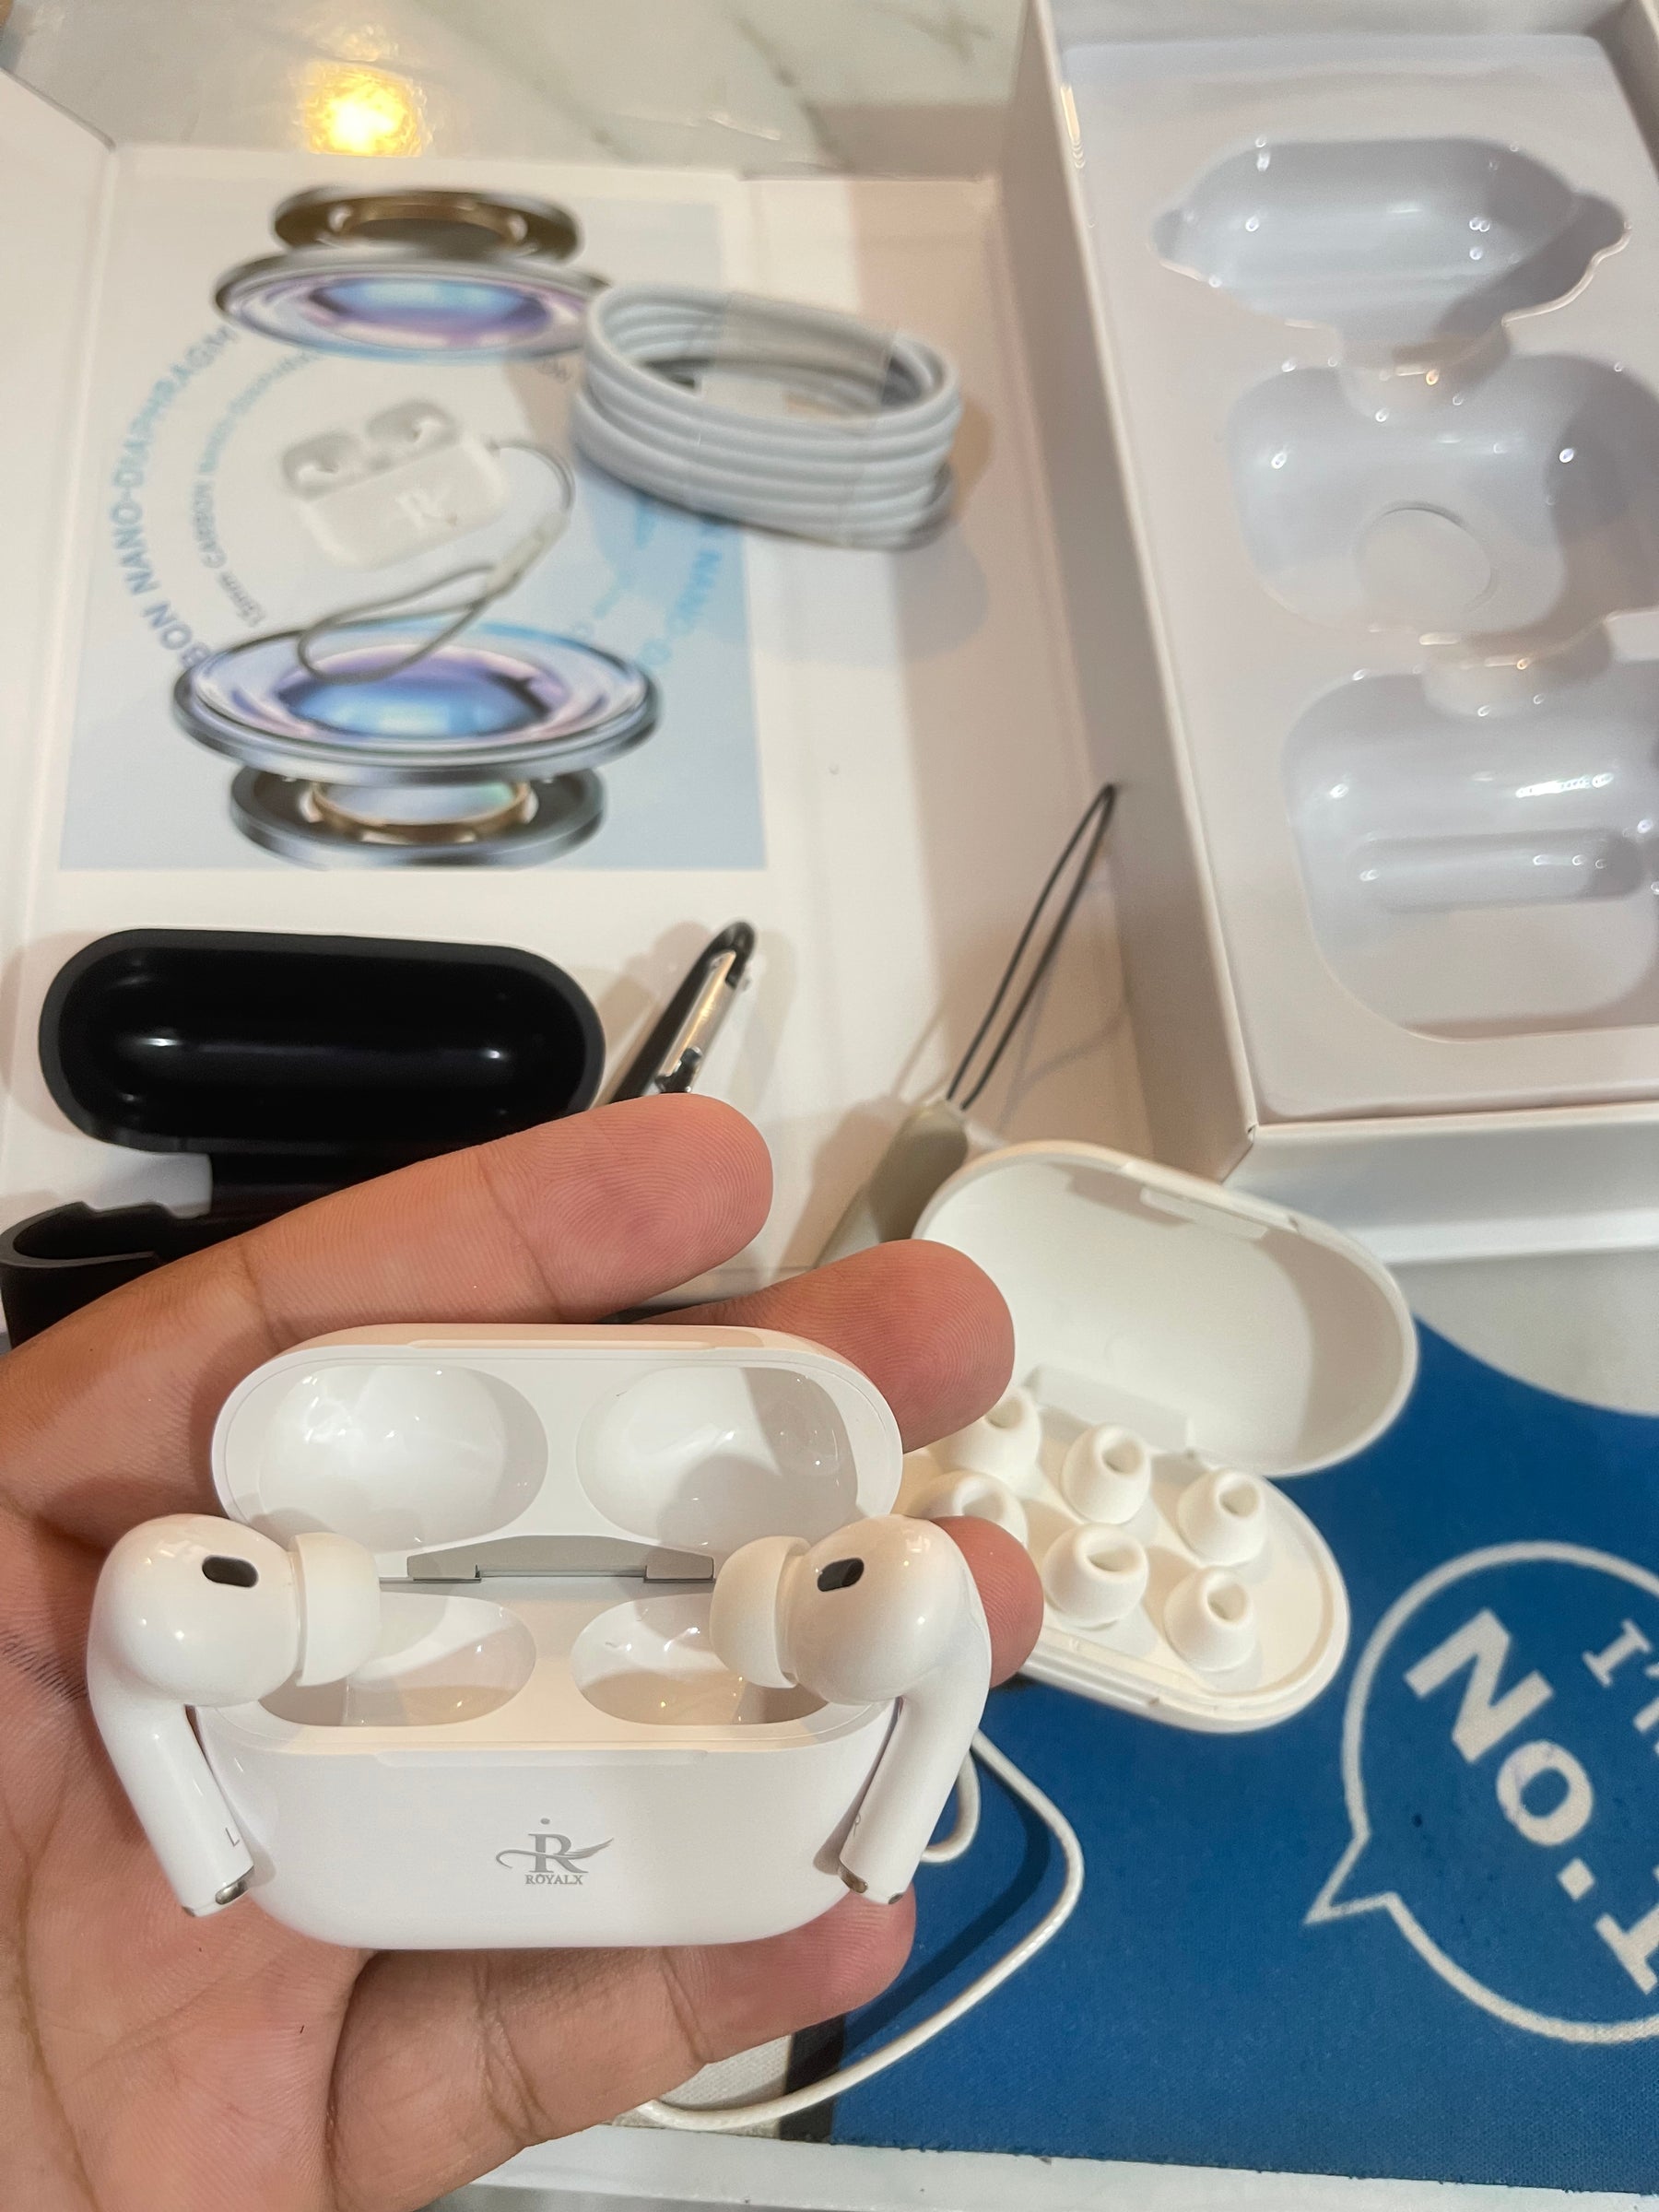 Orginal ROYAL X . AirPods Pro 2 model . Rbt 100 . Very high quality with 1 Years warranty